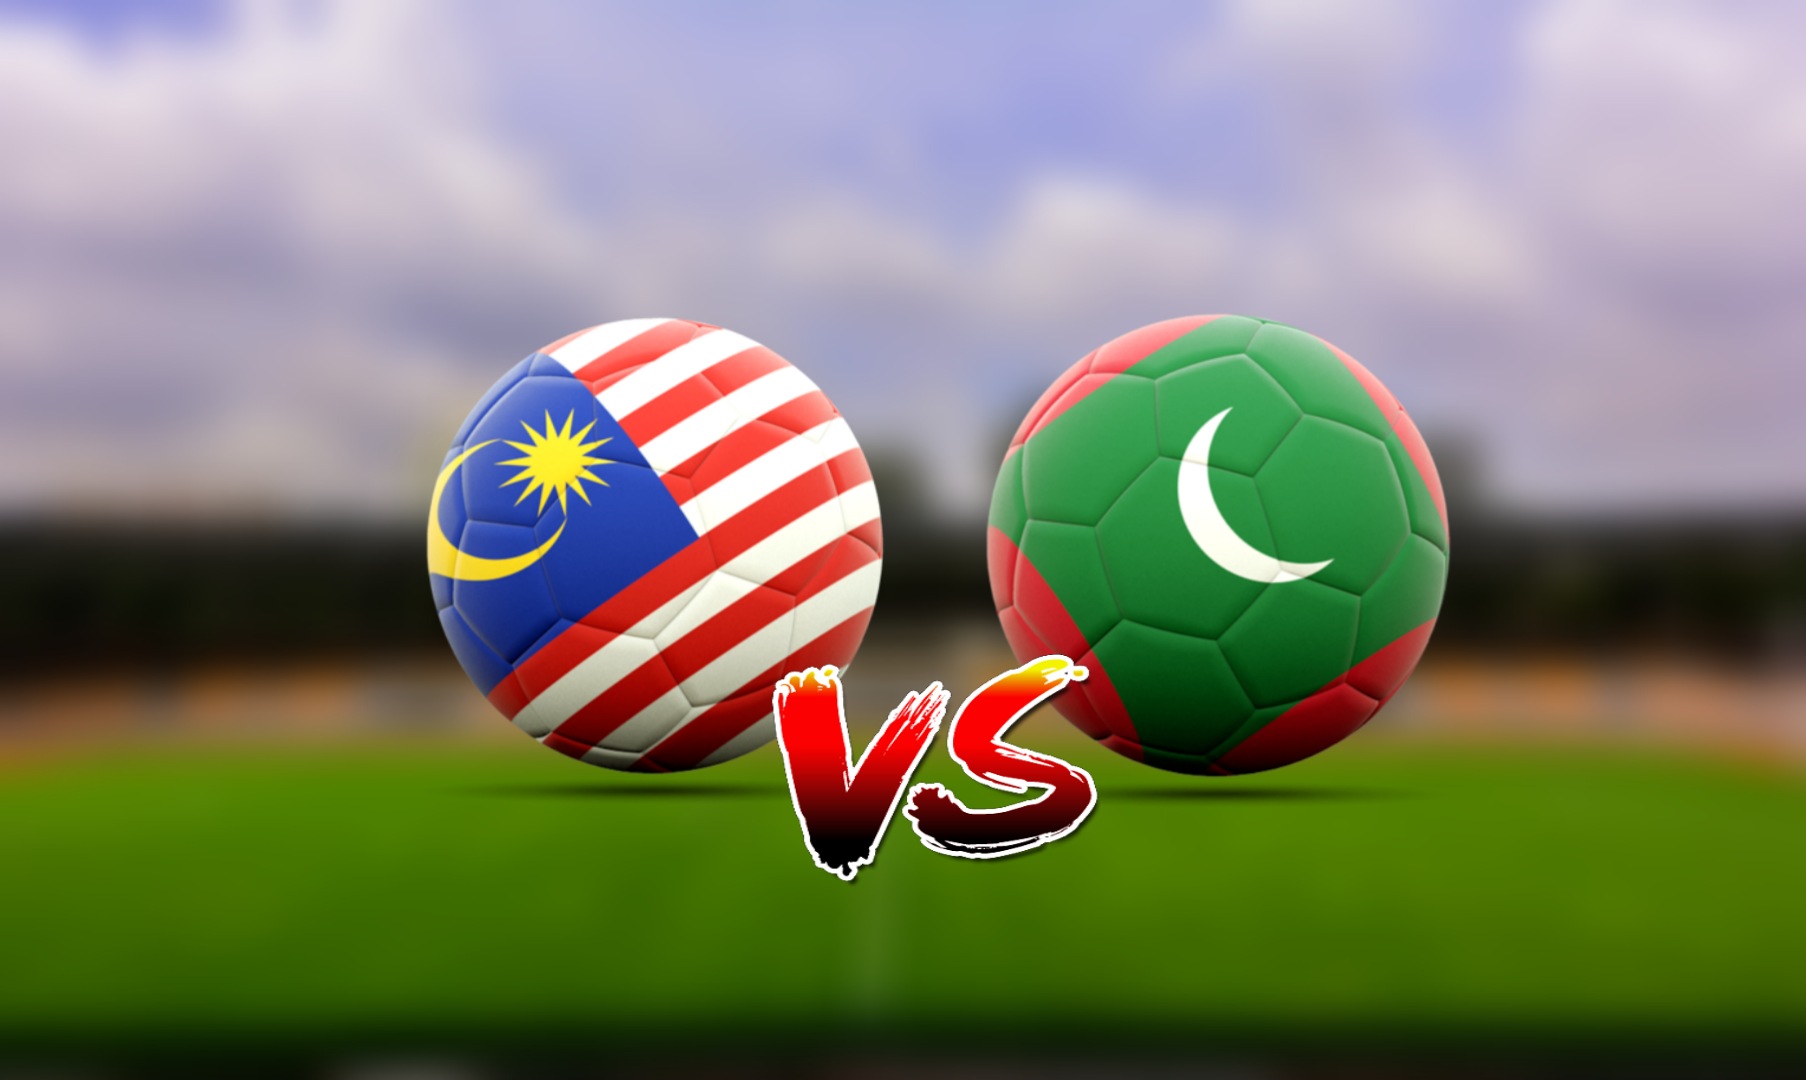 Malaysia Vs Maldives Guesses and Betting Odds